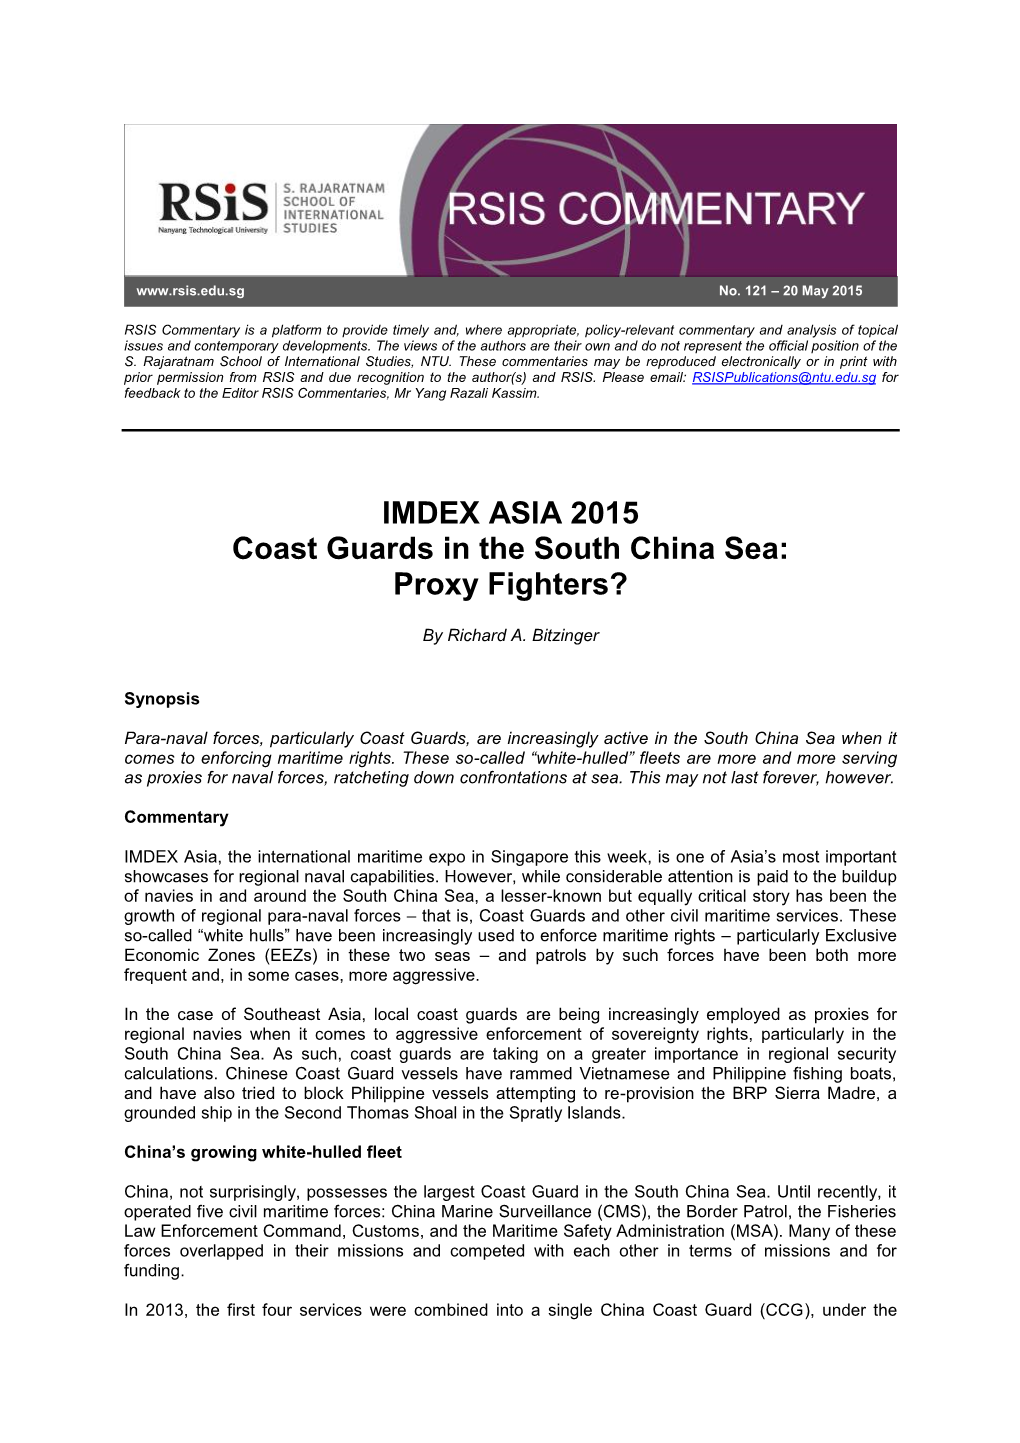 IMDEX ASIA 2015 Coast Guards in the South China Sea: Proxy Fighters?